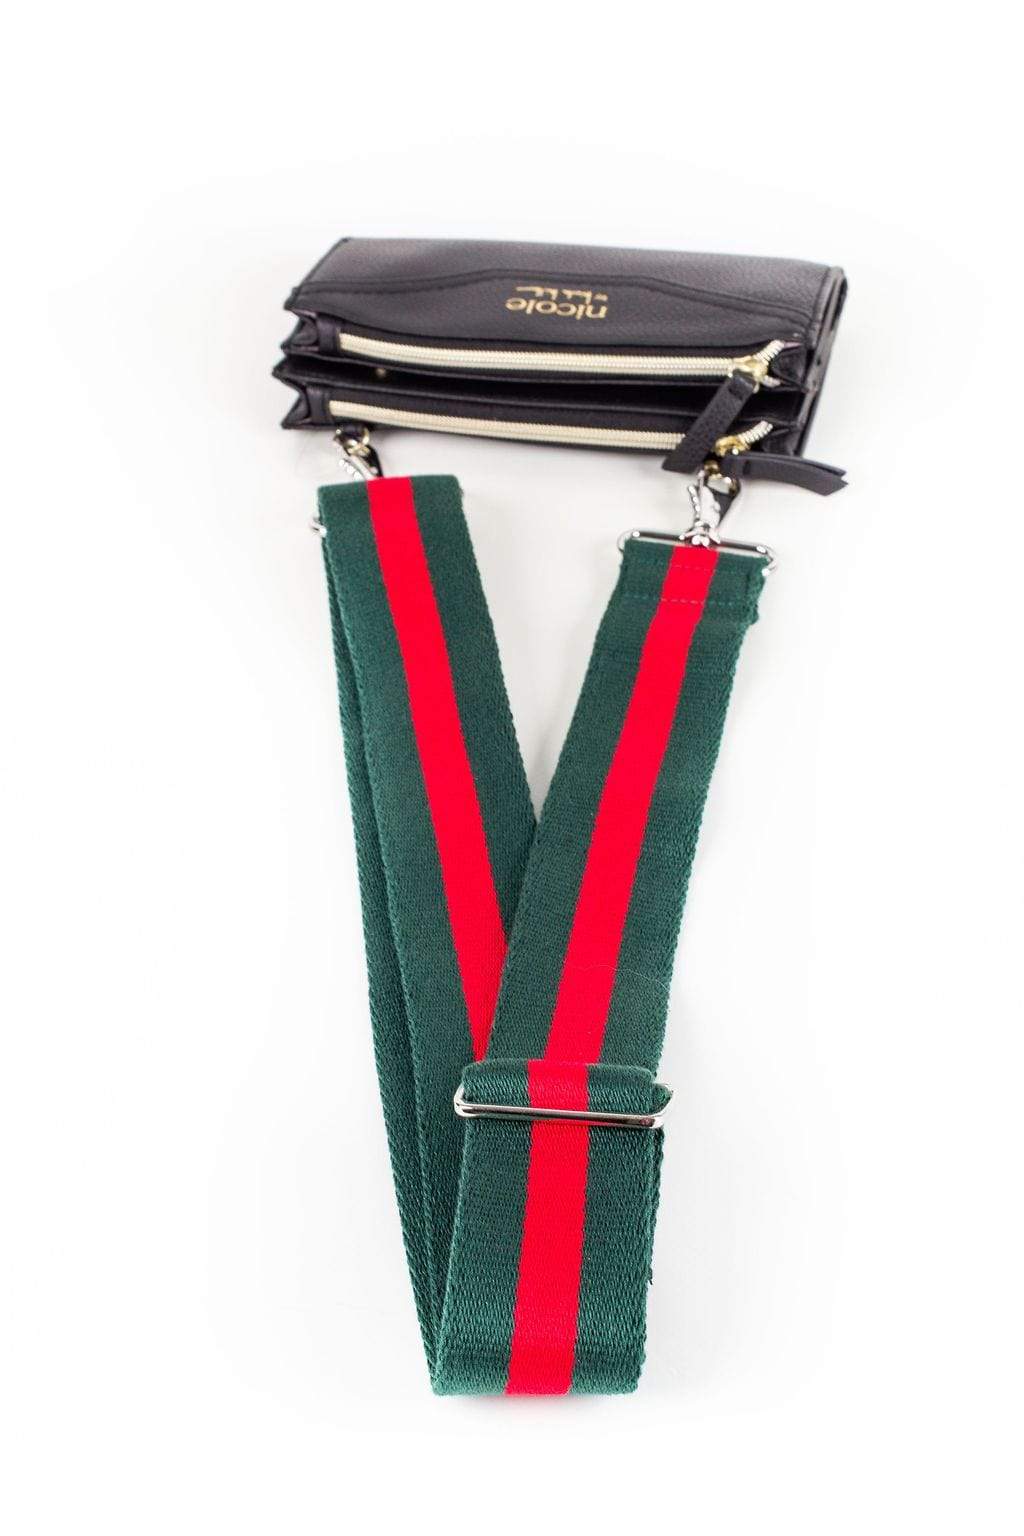 Arriba 66+ imagen gucci red and green strap